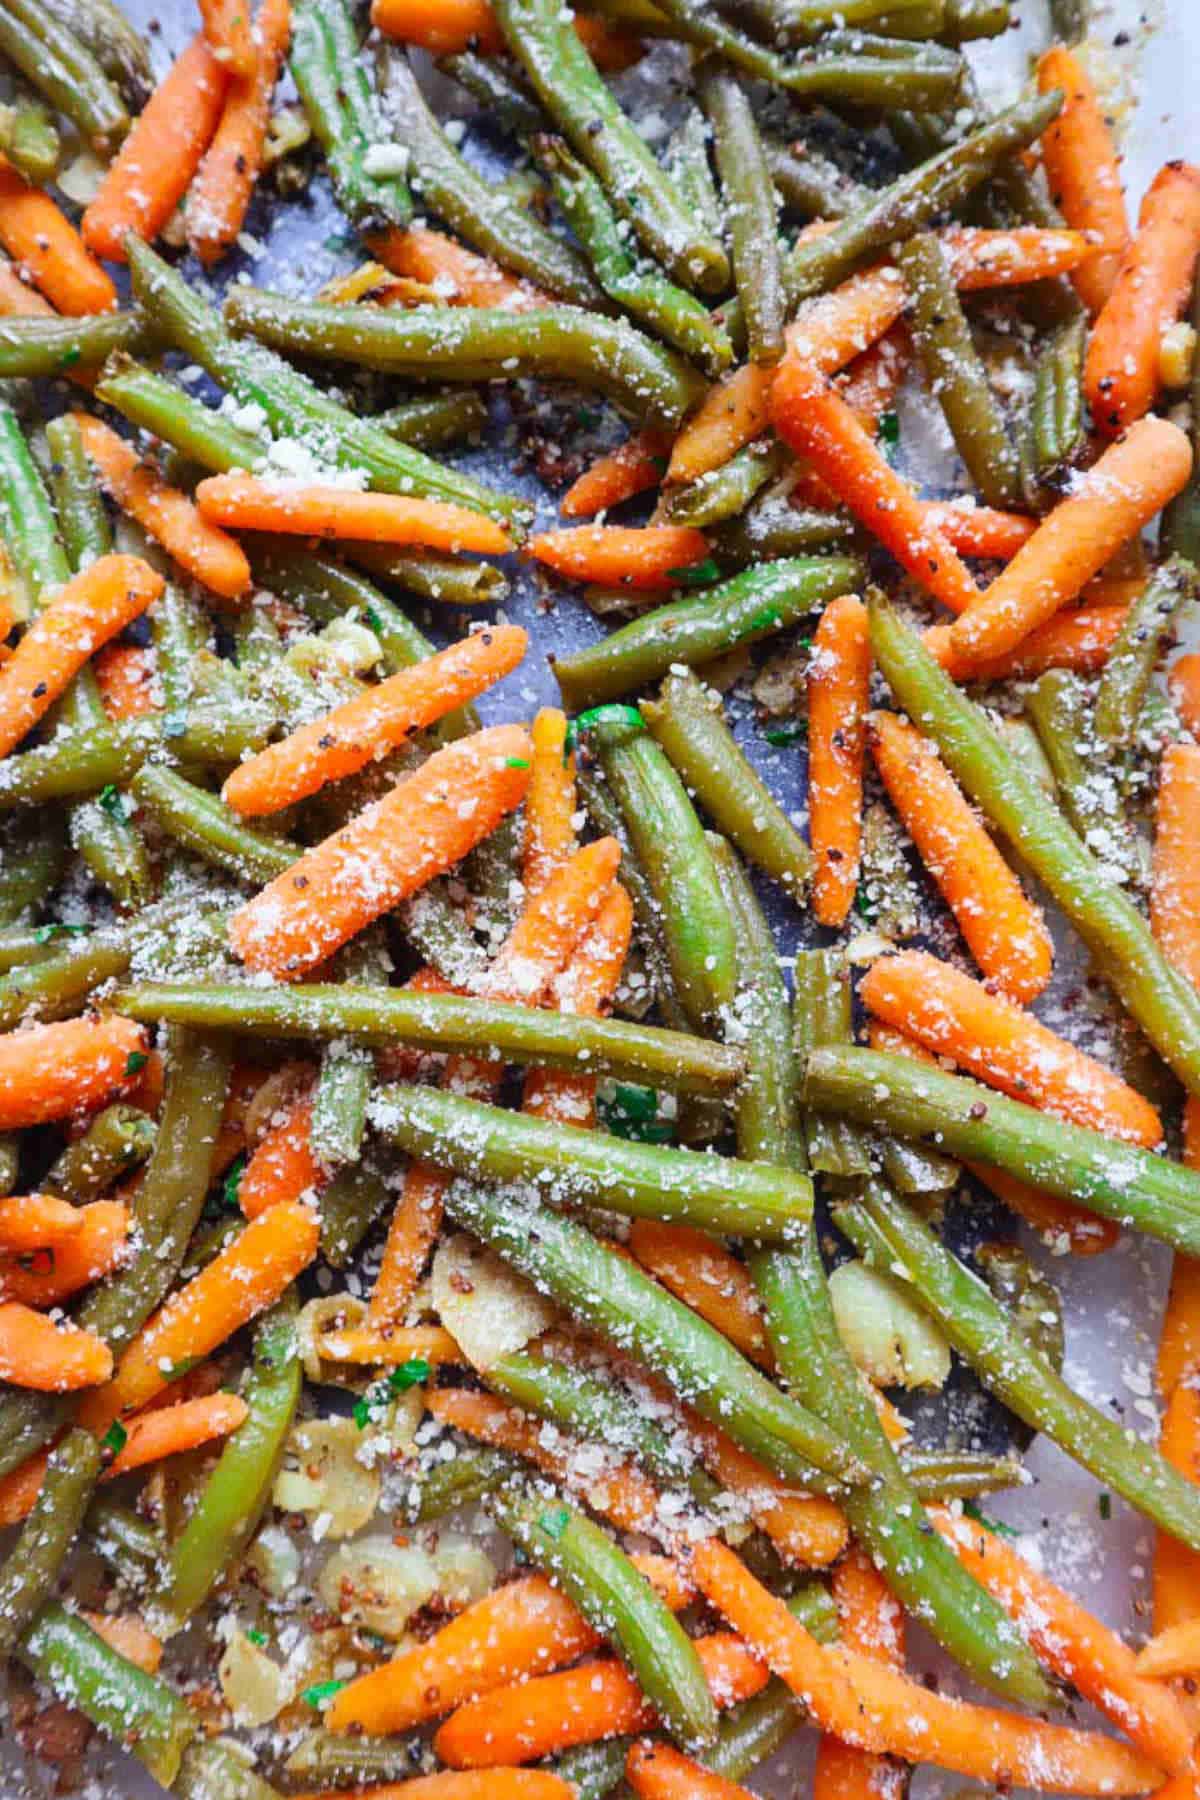 Close up image of roasted carrots and green beans.